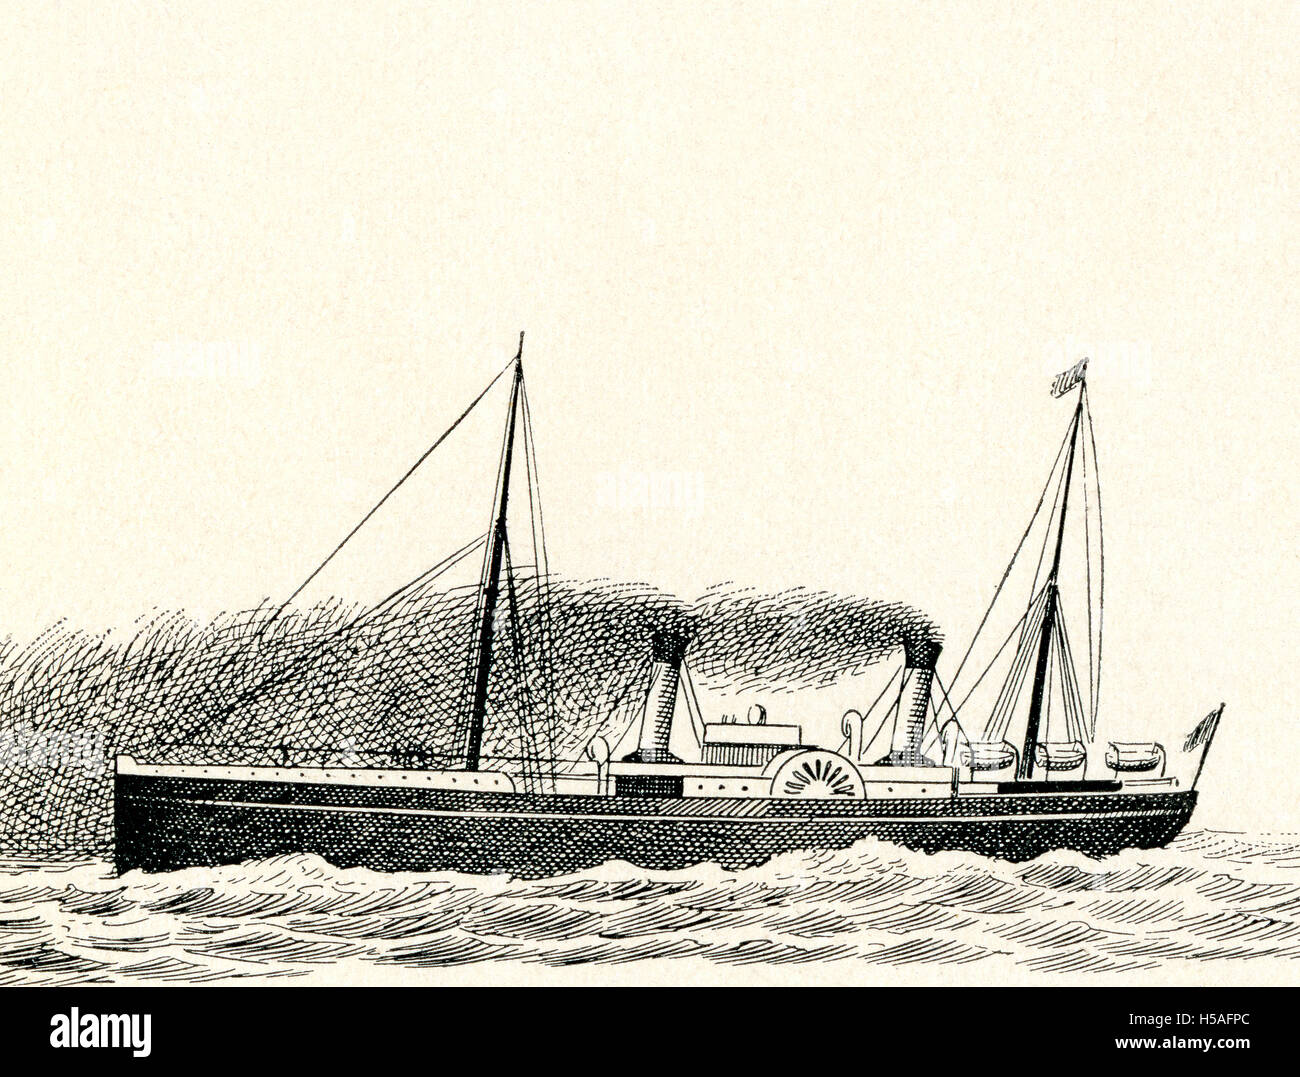 A 19th century paddle steamer. Stock Photo